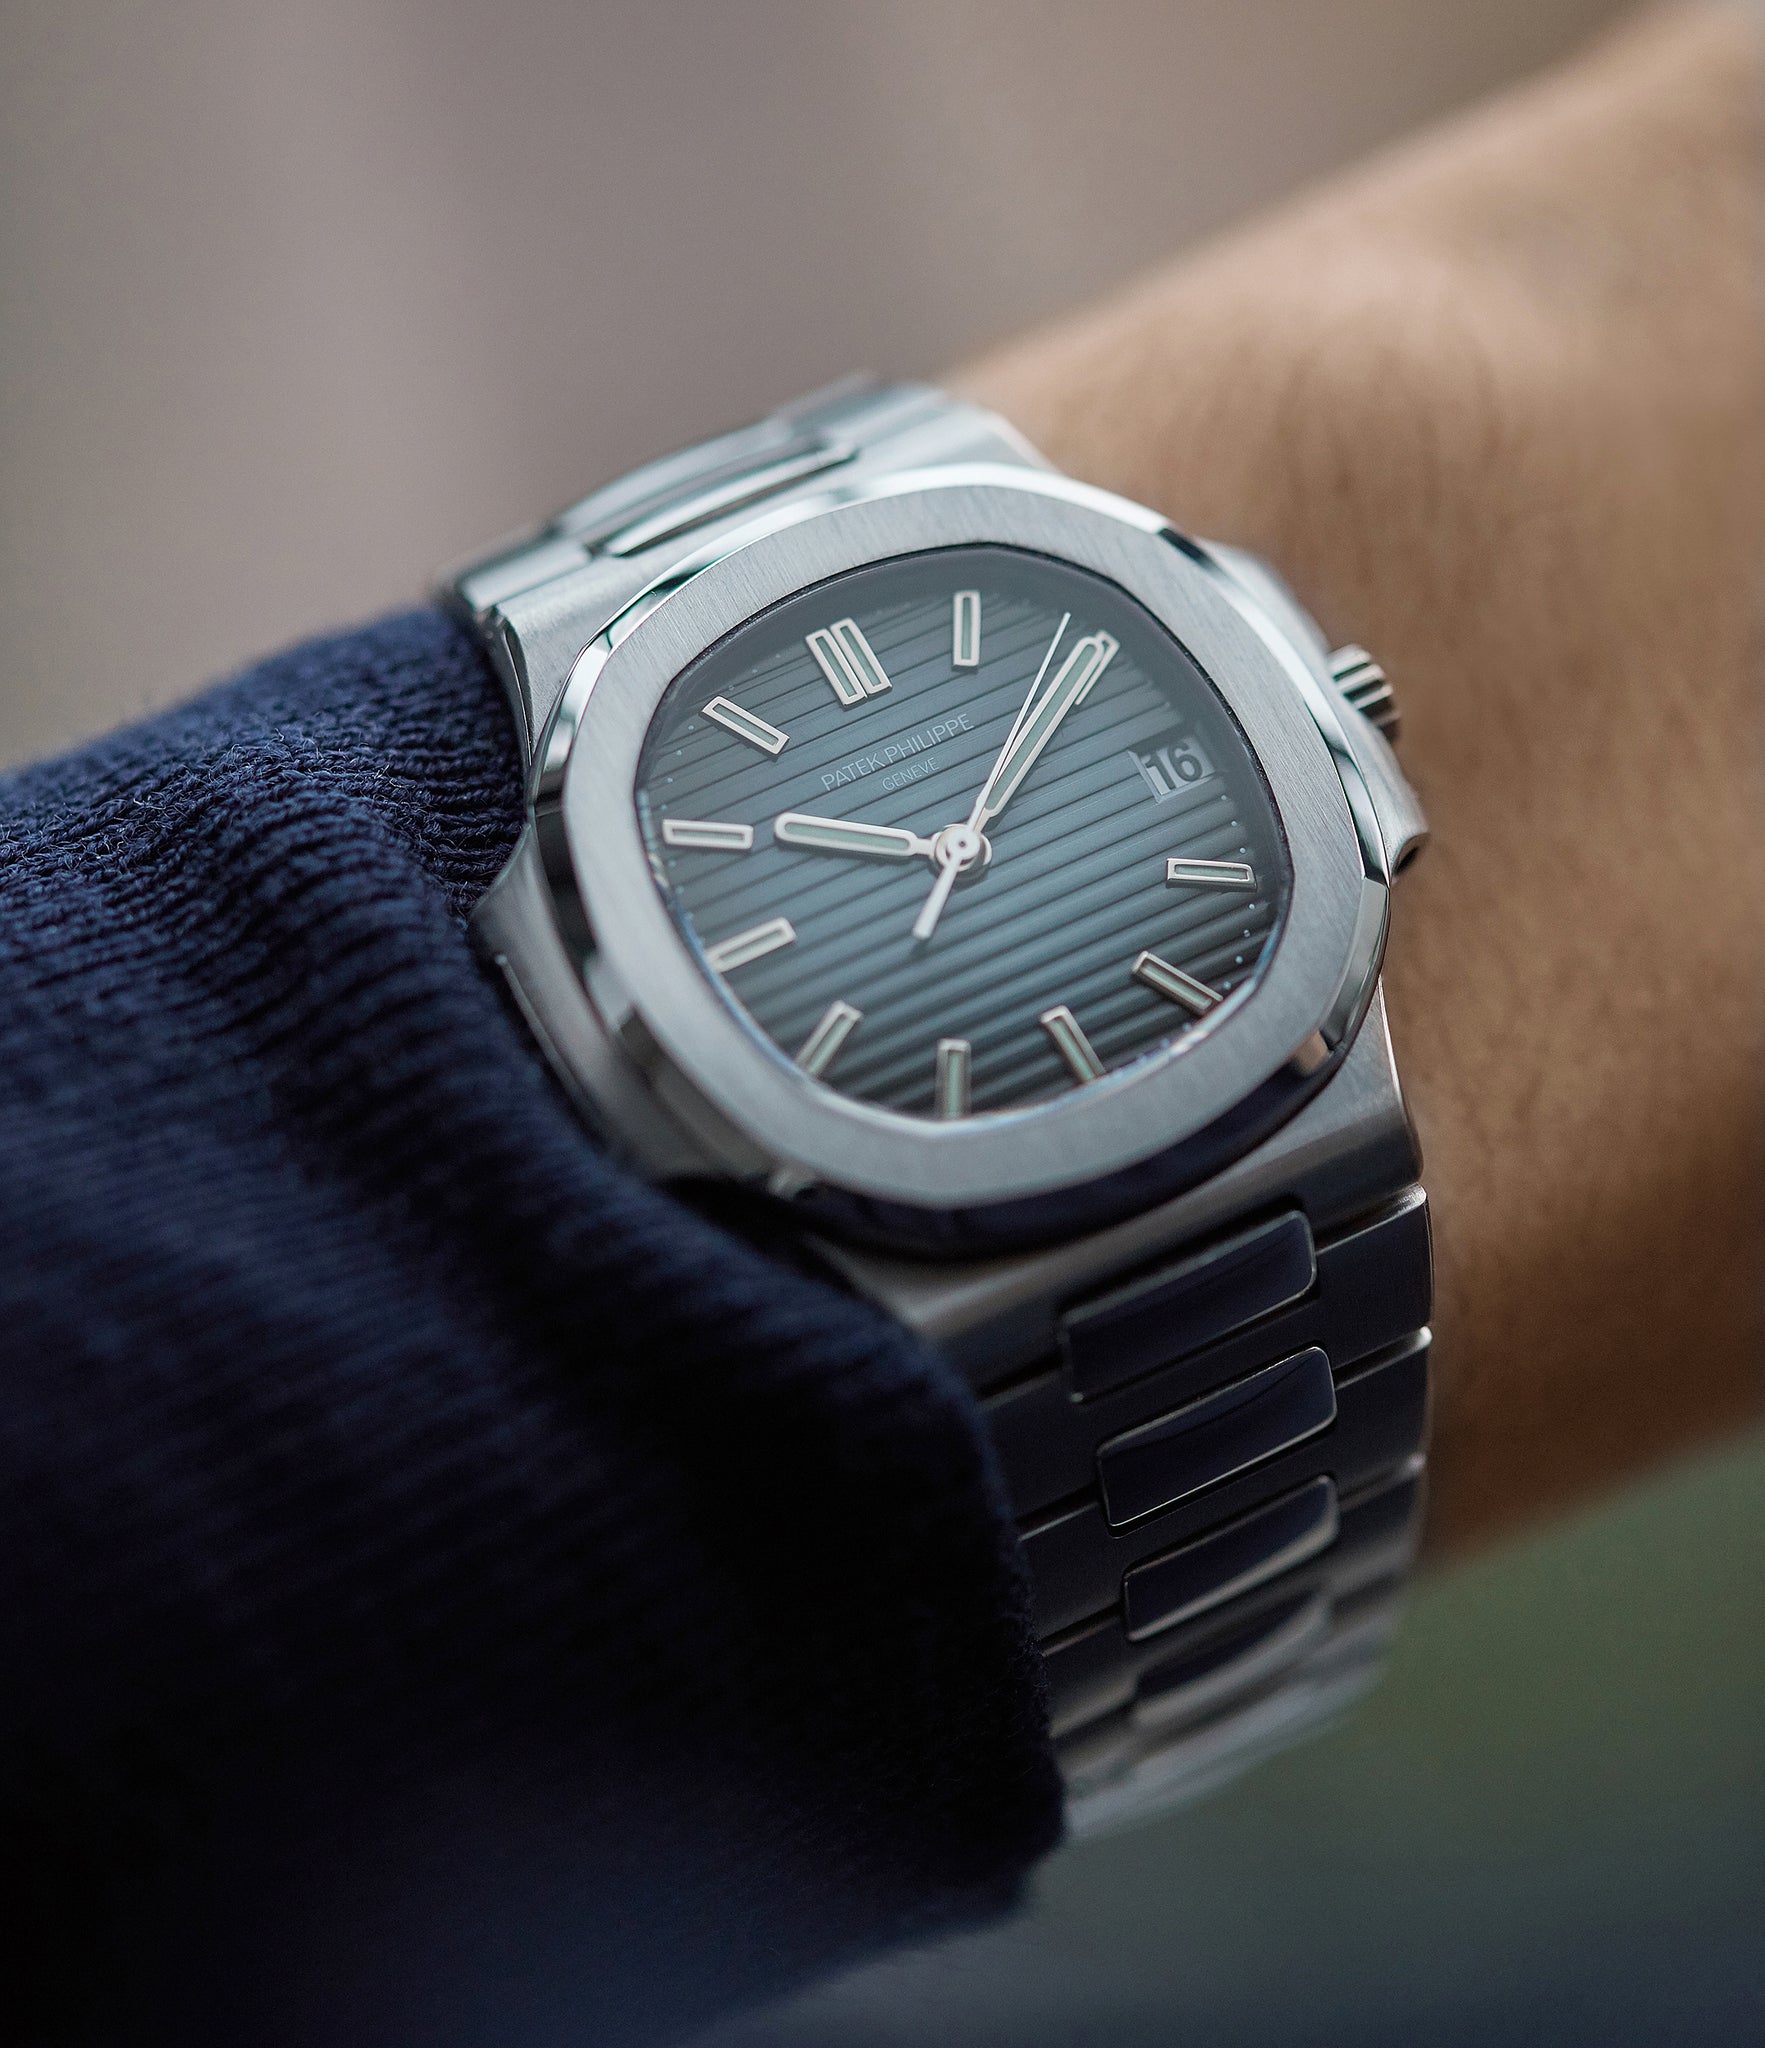 luxury sports watch Patek Philippe Nautilus 5800/1A-001 steel pre-owned watch for sale online at A Collected Man London UK specialist of rare watches